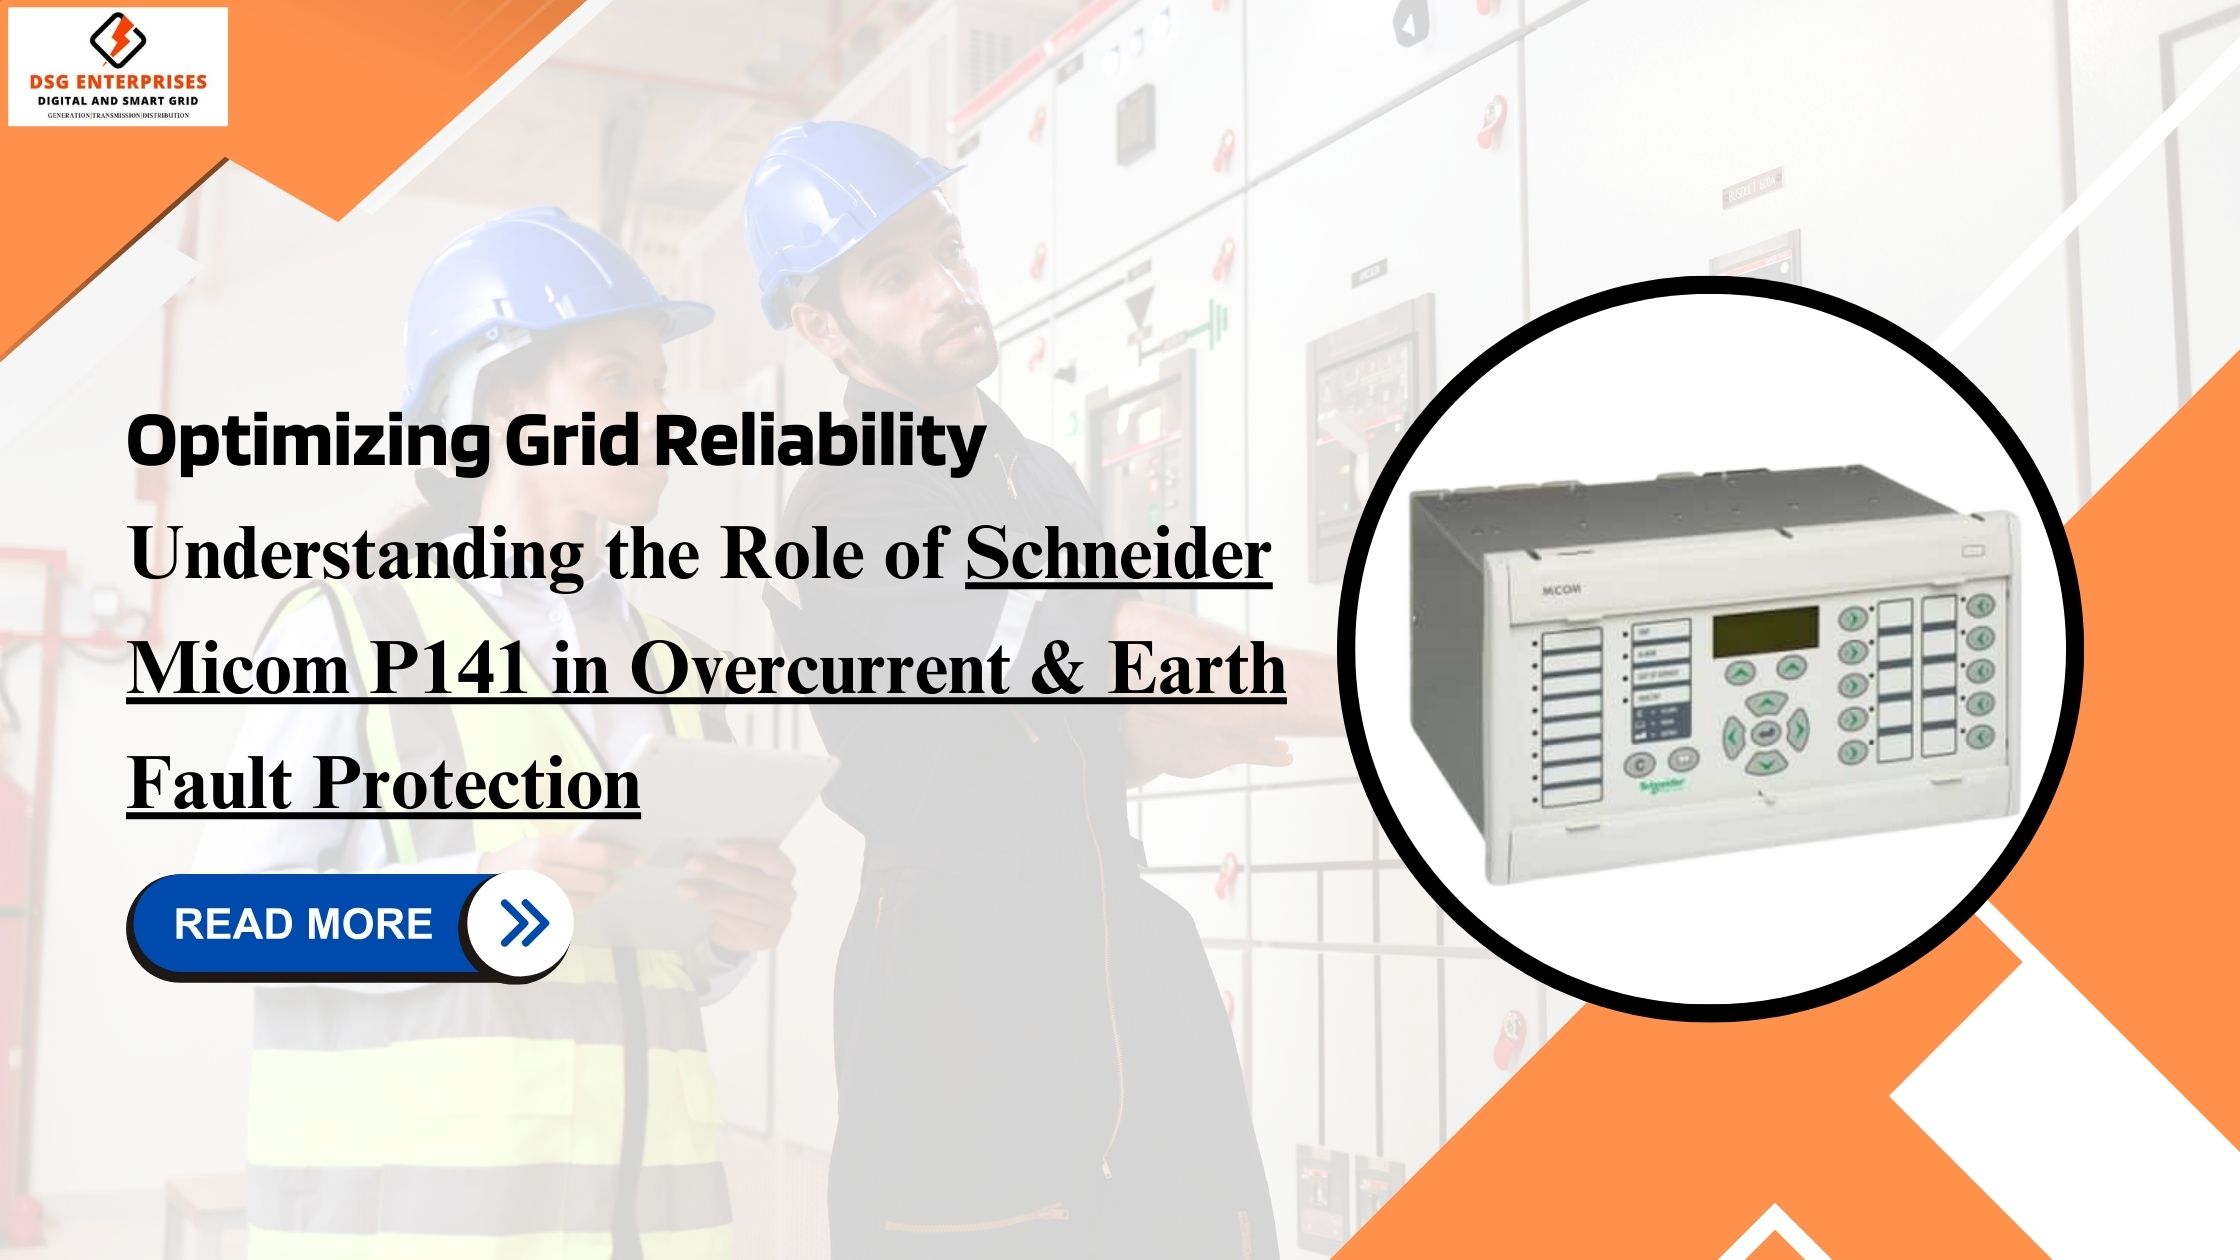 You are currently viewing Optimizing Grid Reliability: Understanding the Role of Schneider Micom P141 in Overcurrent & Earth Fault Protection